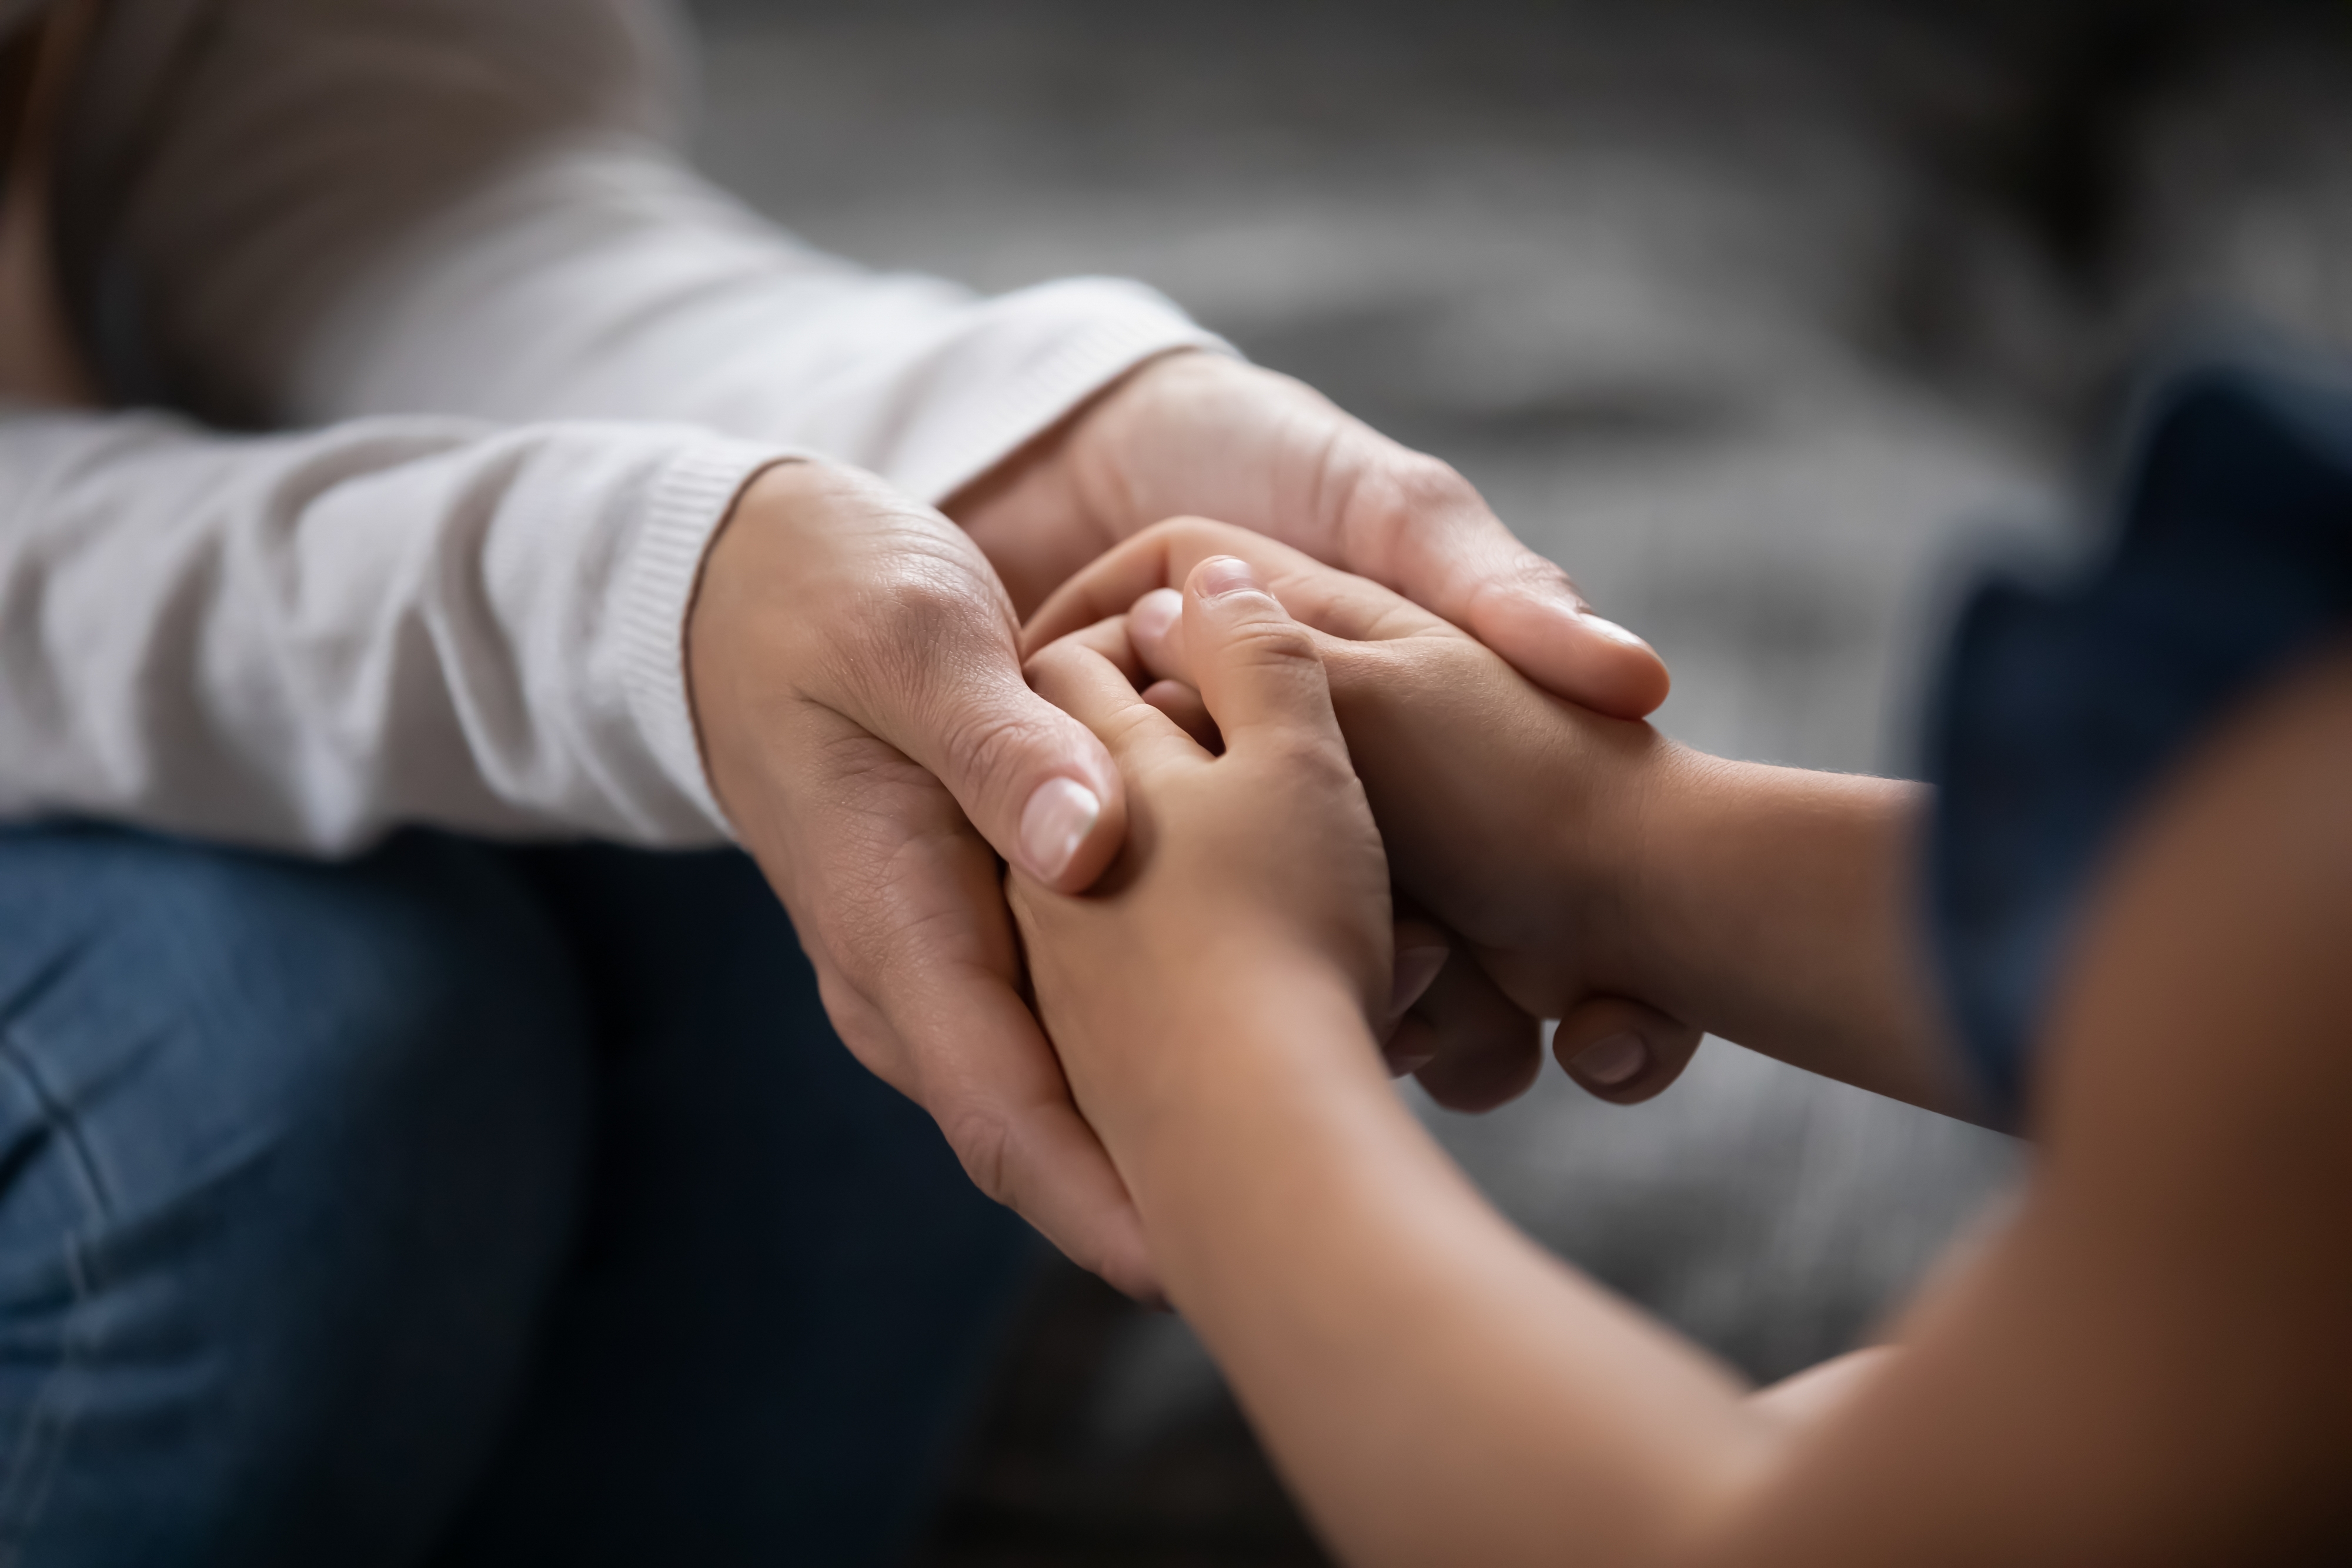 A close up of an adult holding a child's hands